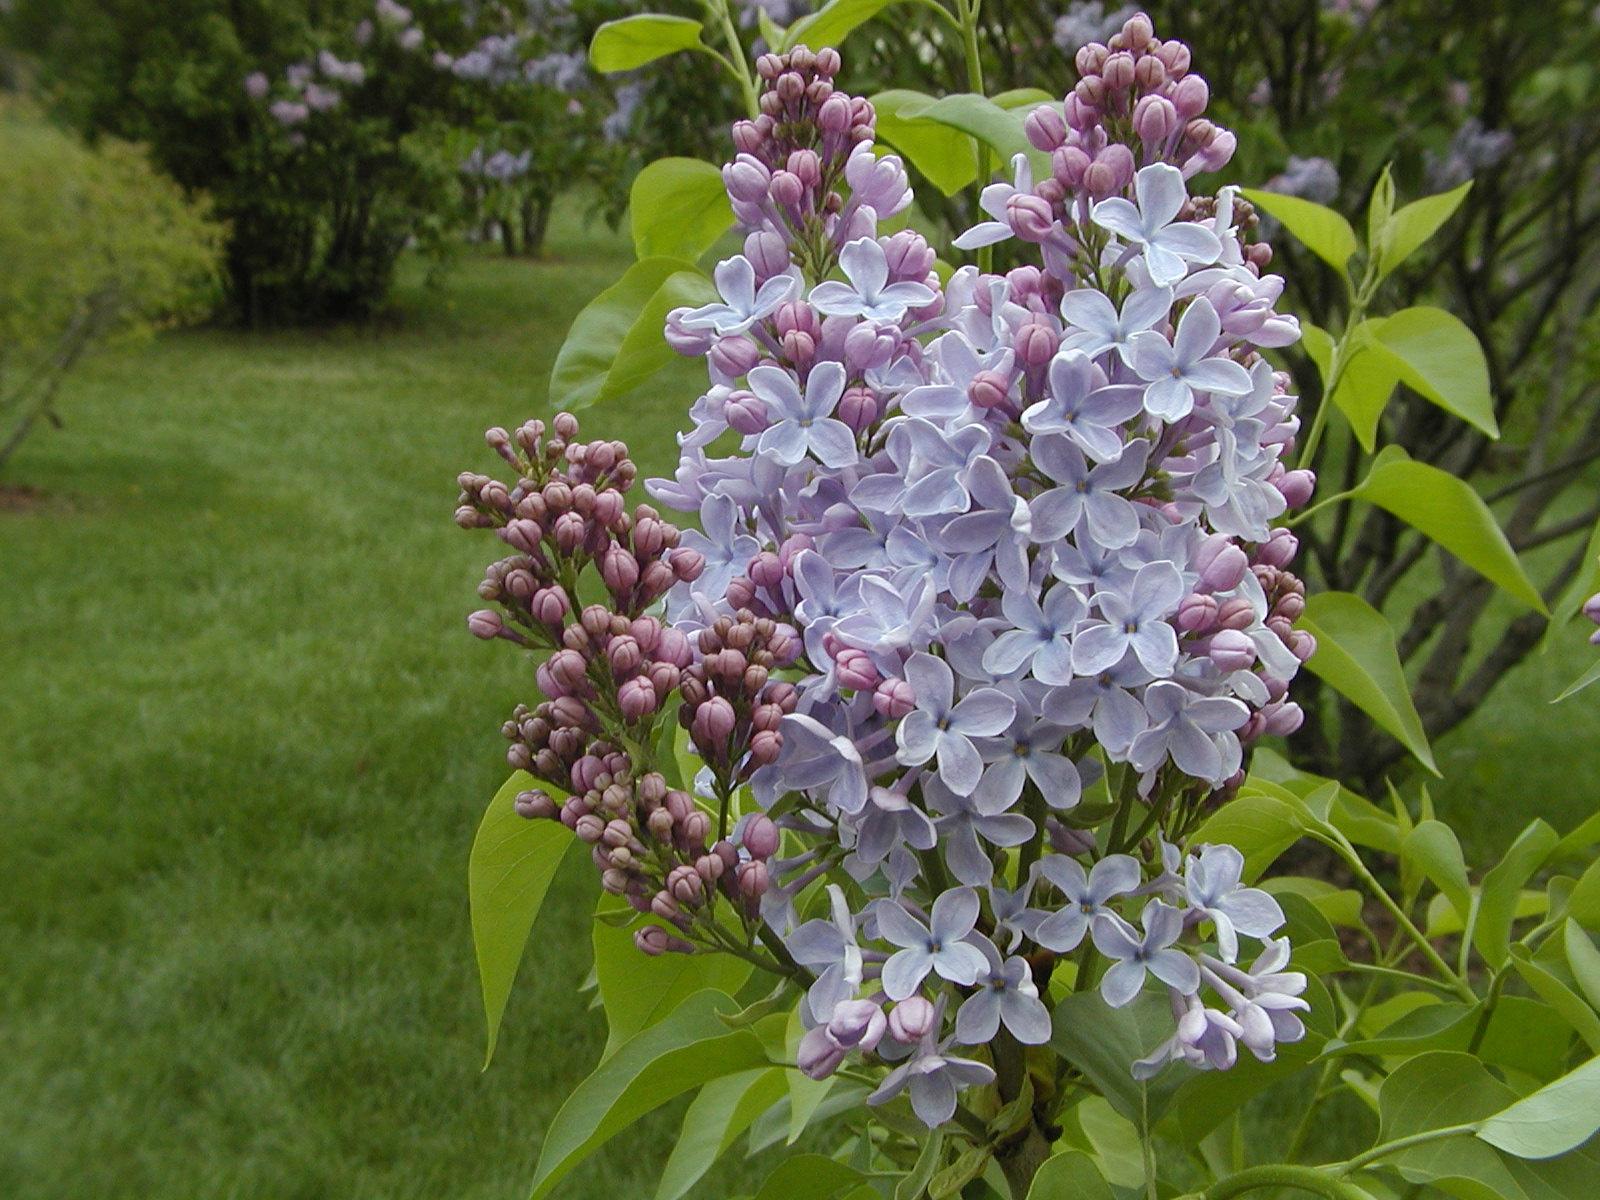 Lilacs. Space for life